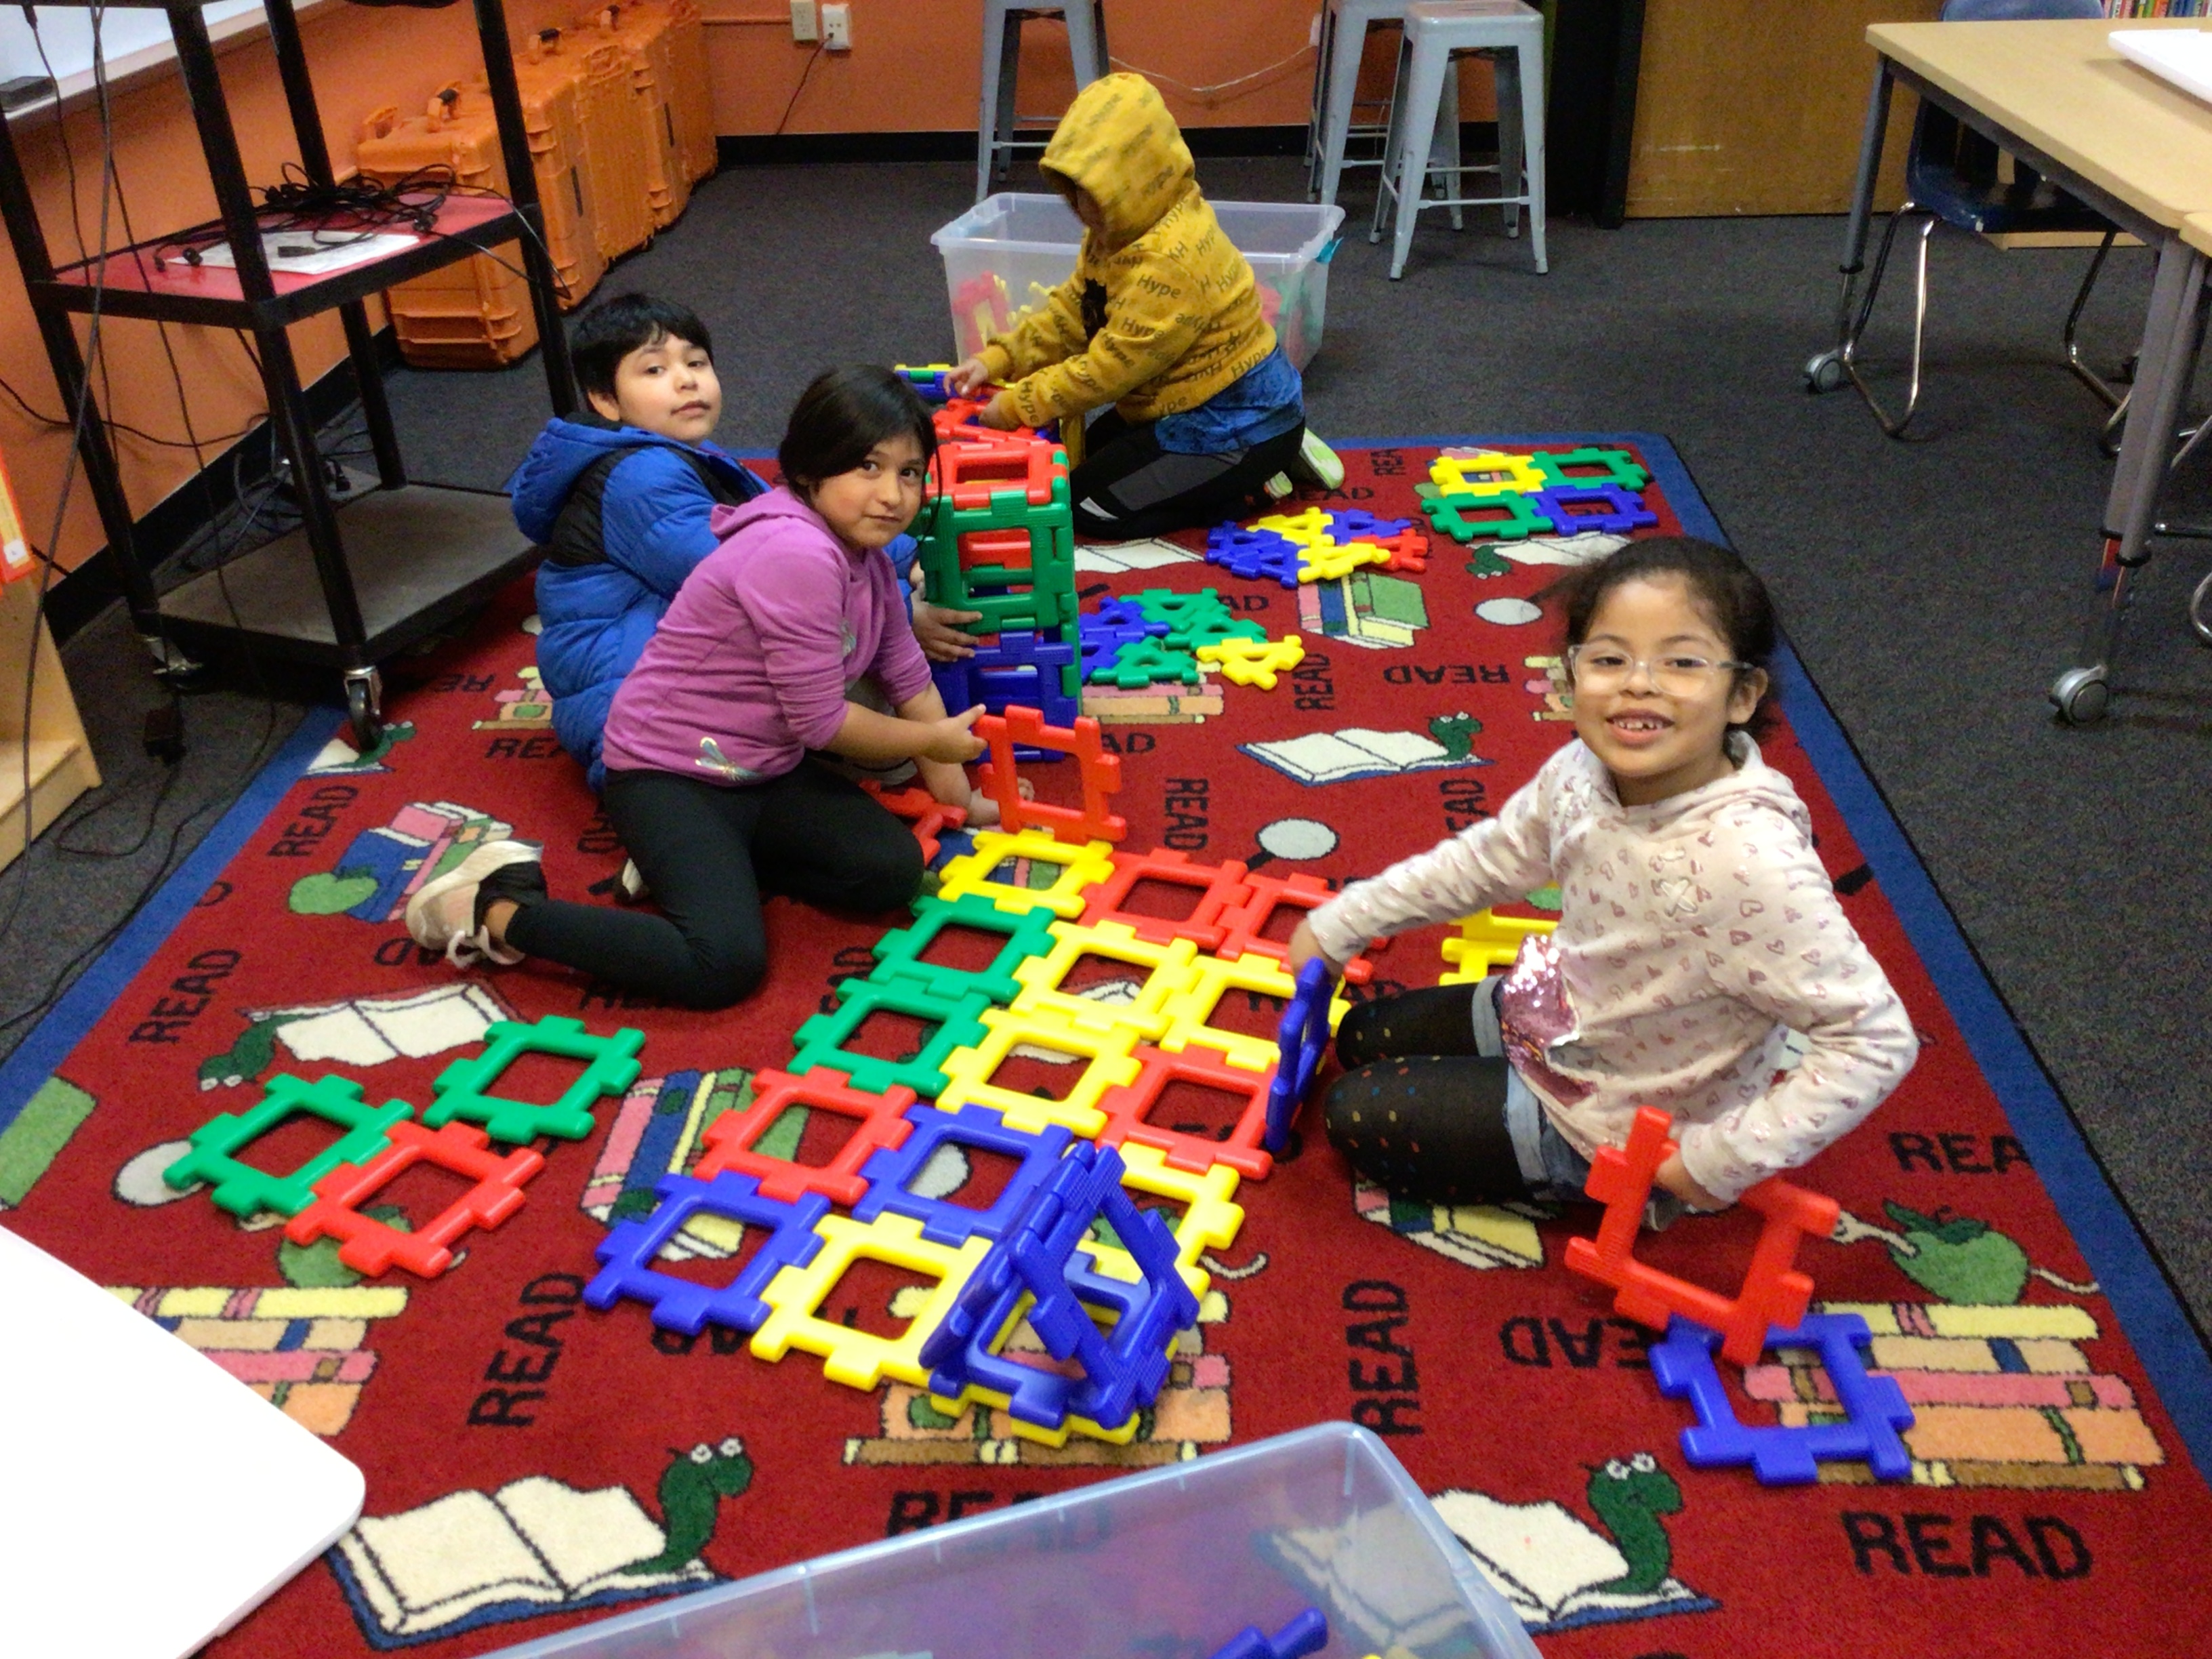 Students are starting to build with large plastic colorful blocks